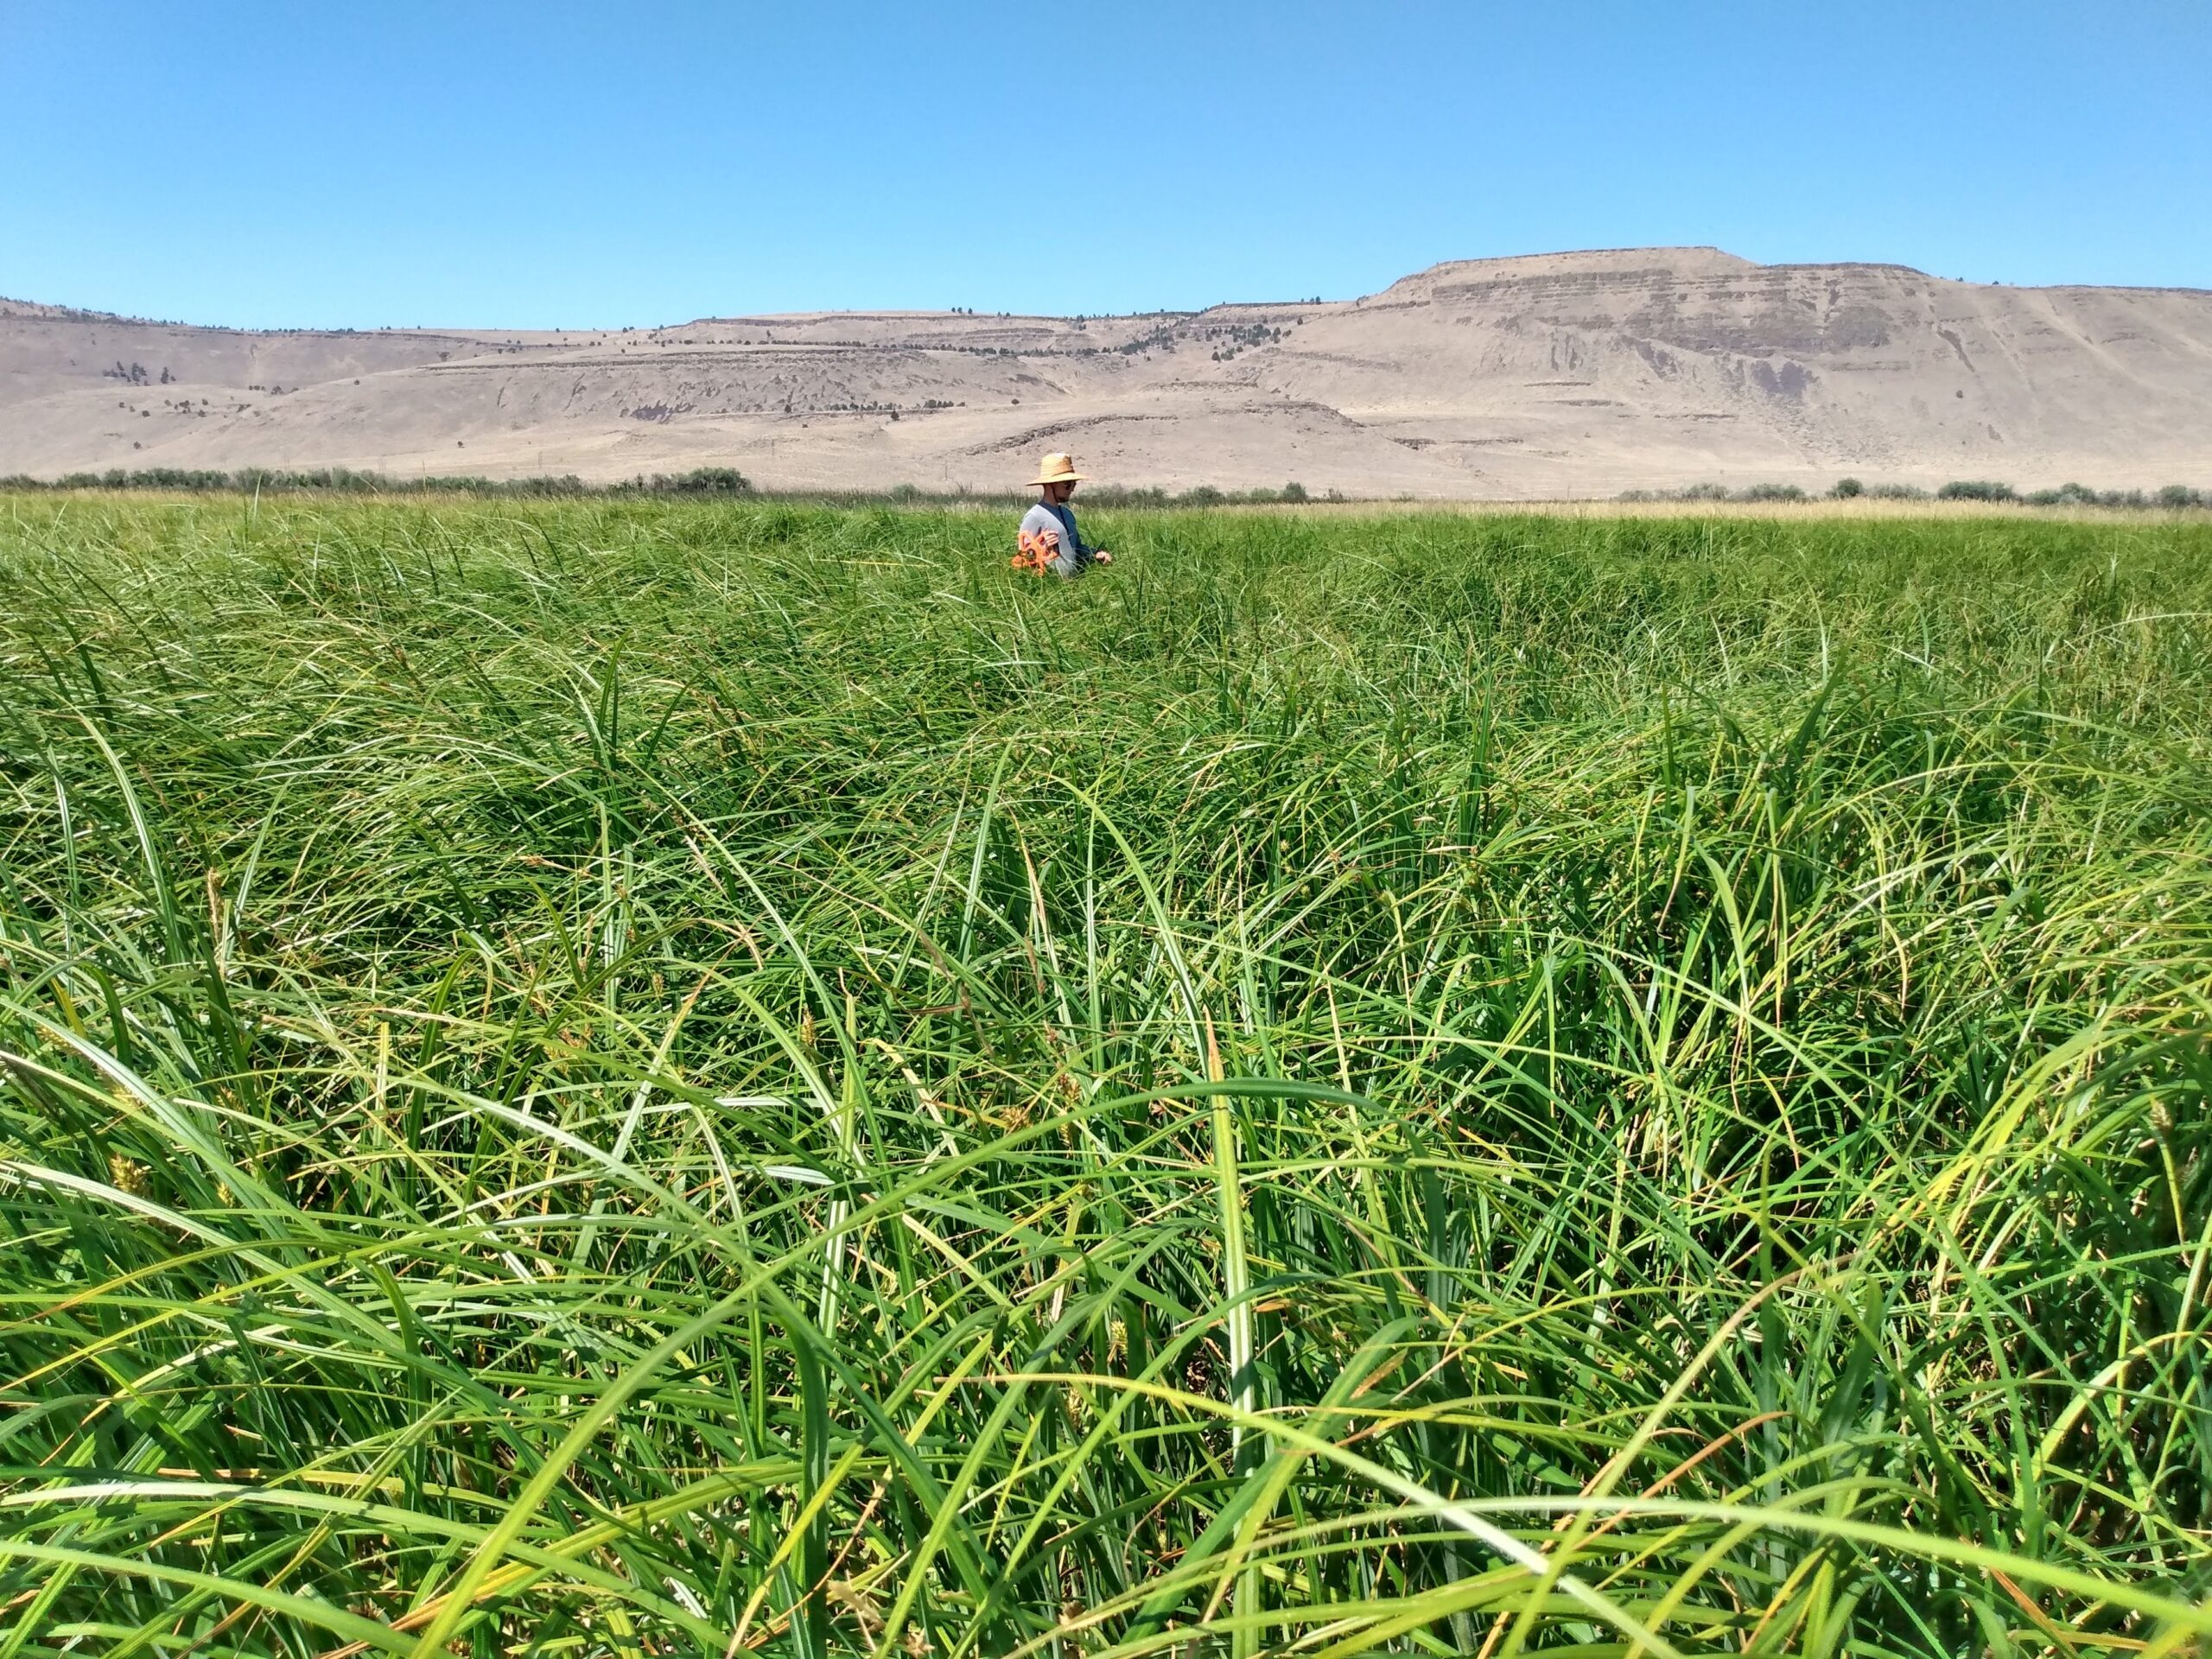 Intern collecting vegetation samples in wide open field of sedges and grass well over 4 feet tall.